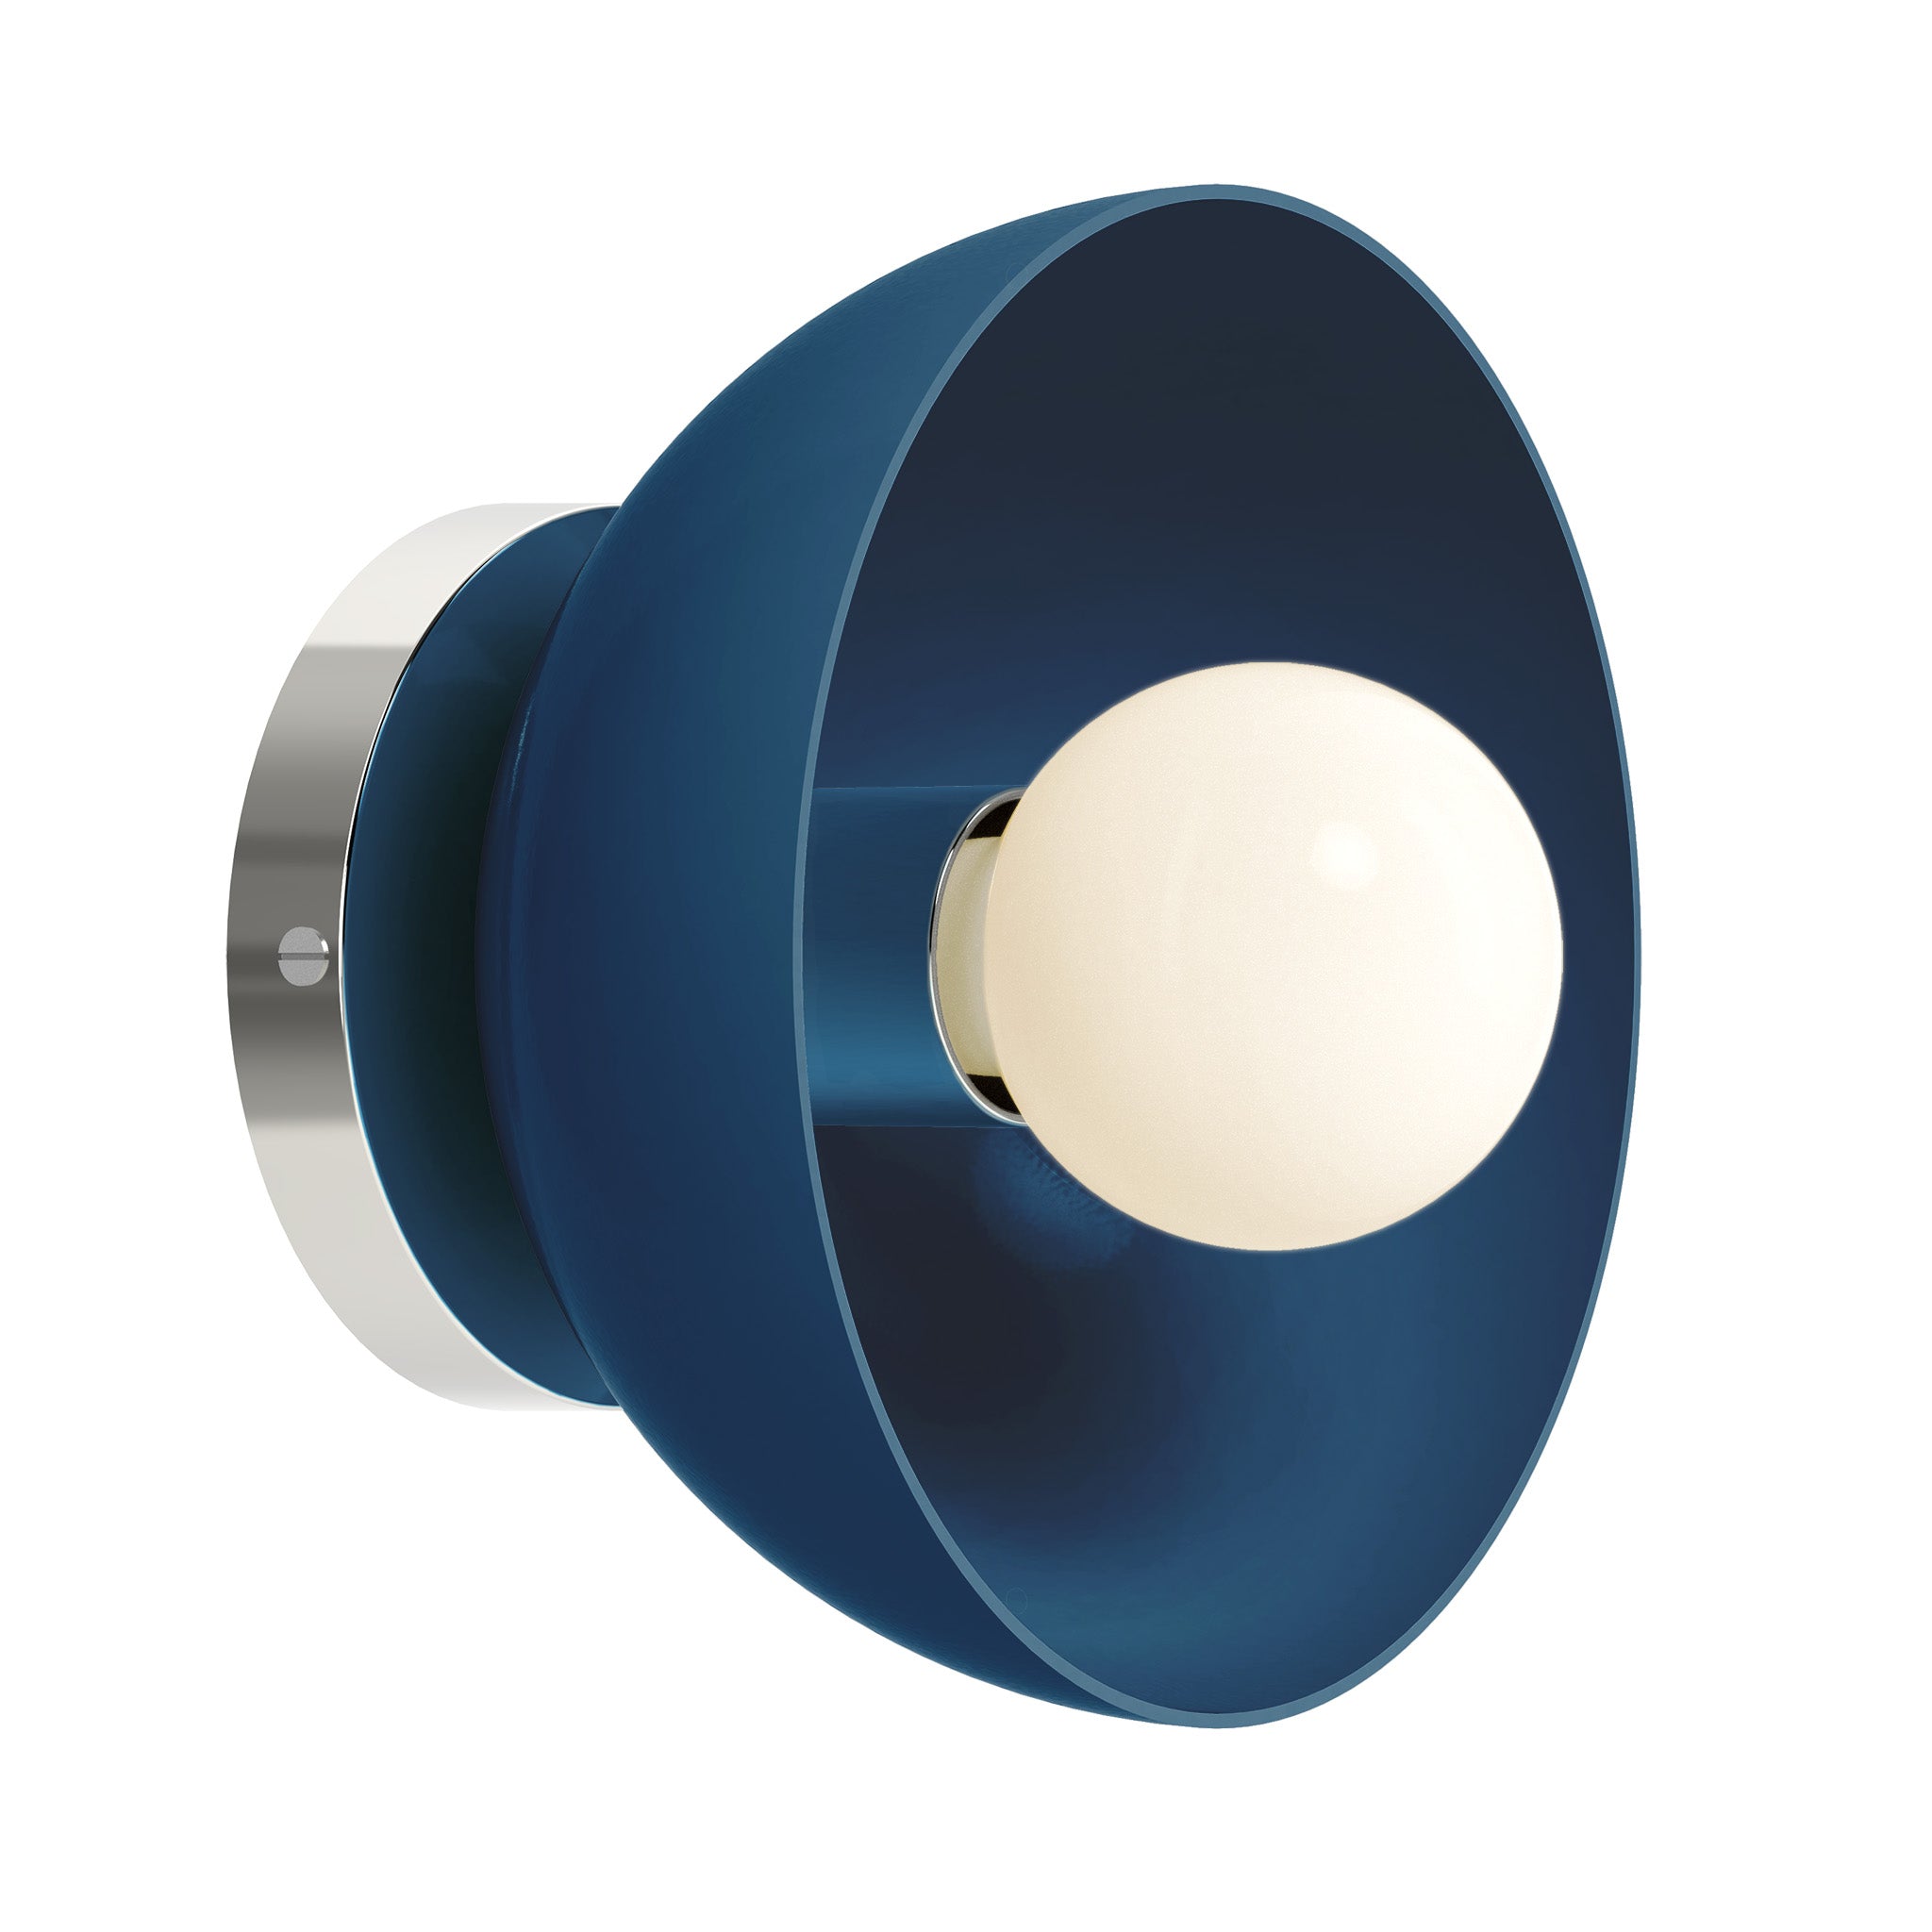 Nickel and slate blue color Hemi sconce 8" Dutton Brown lighting